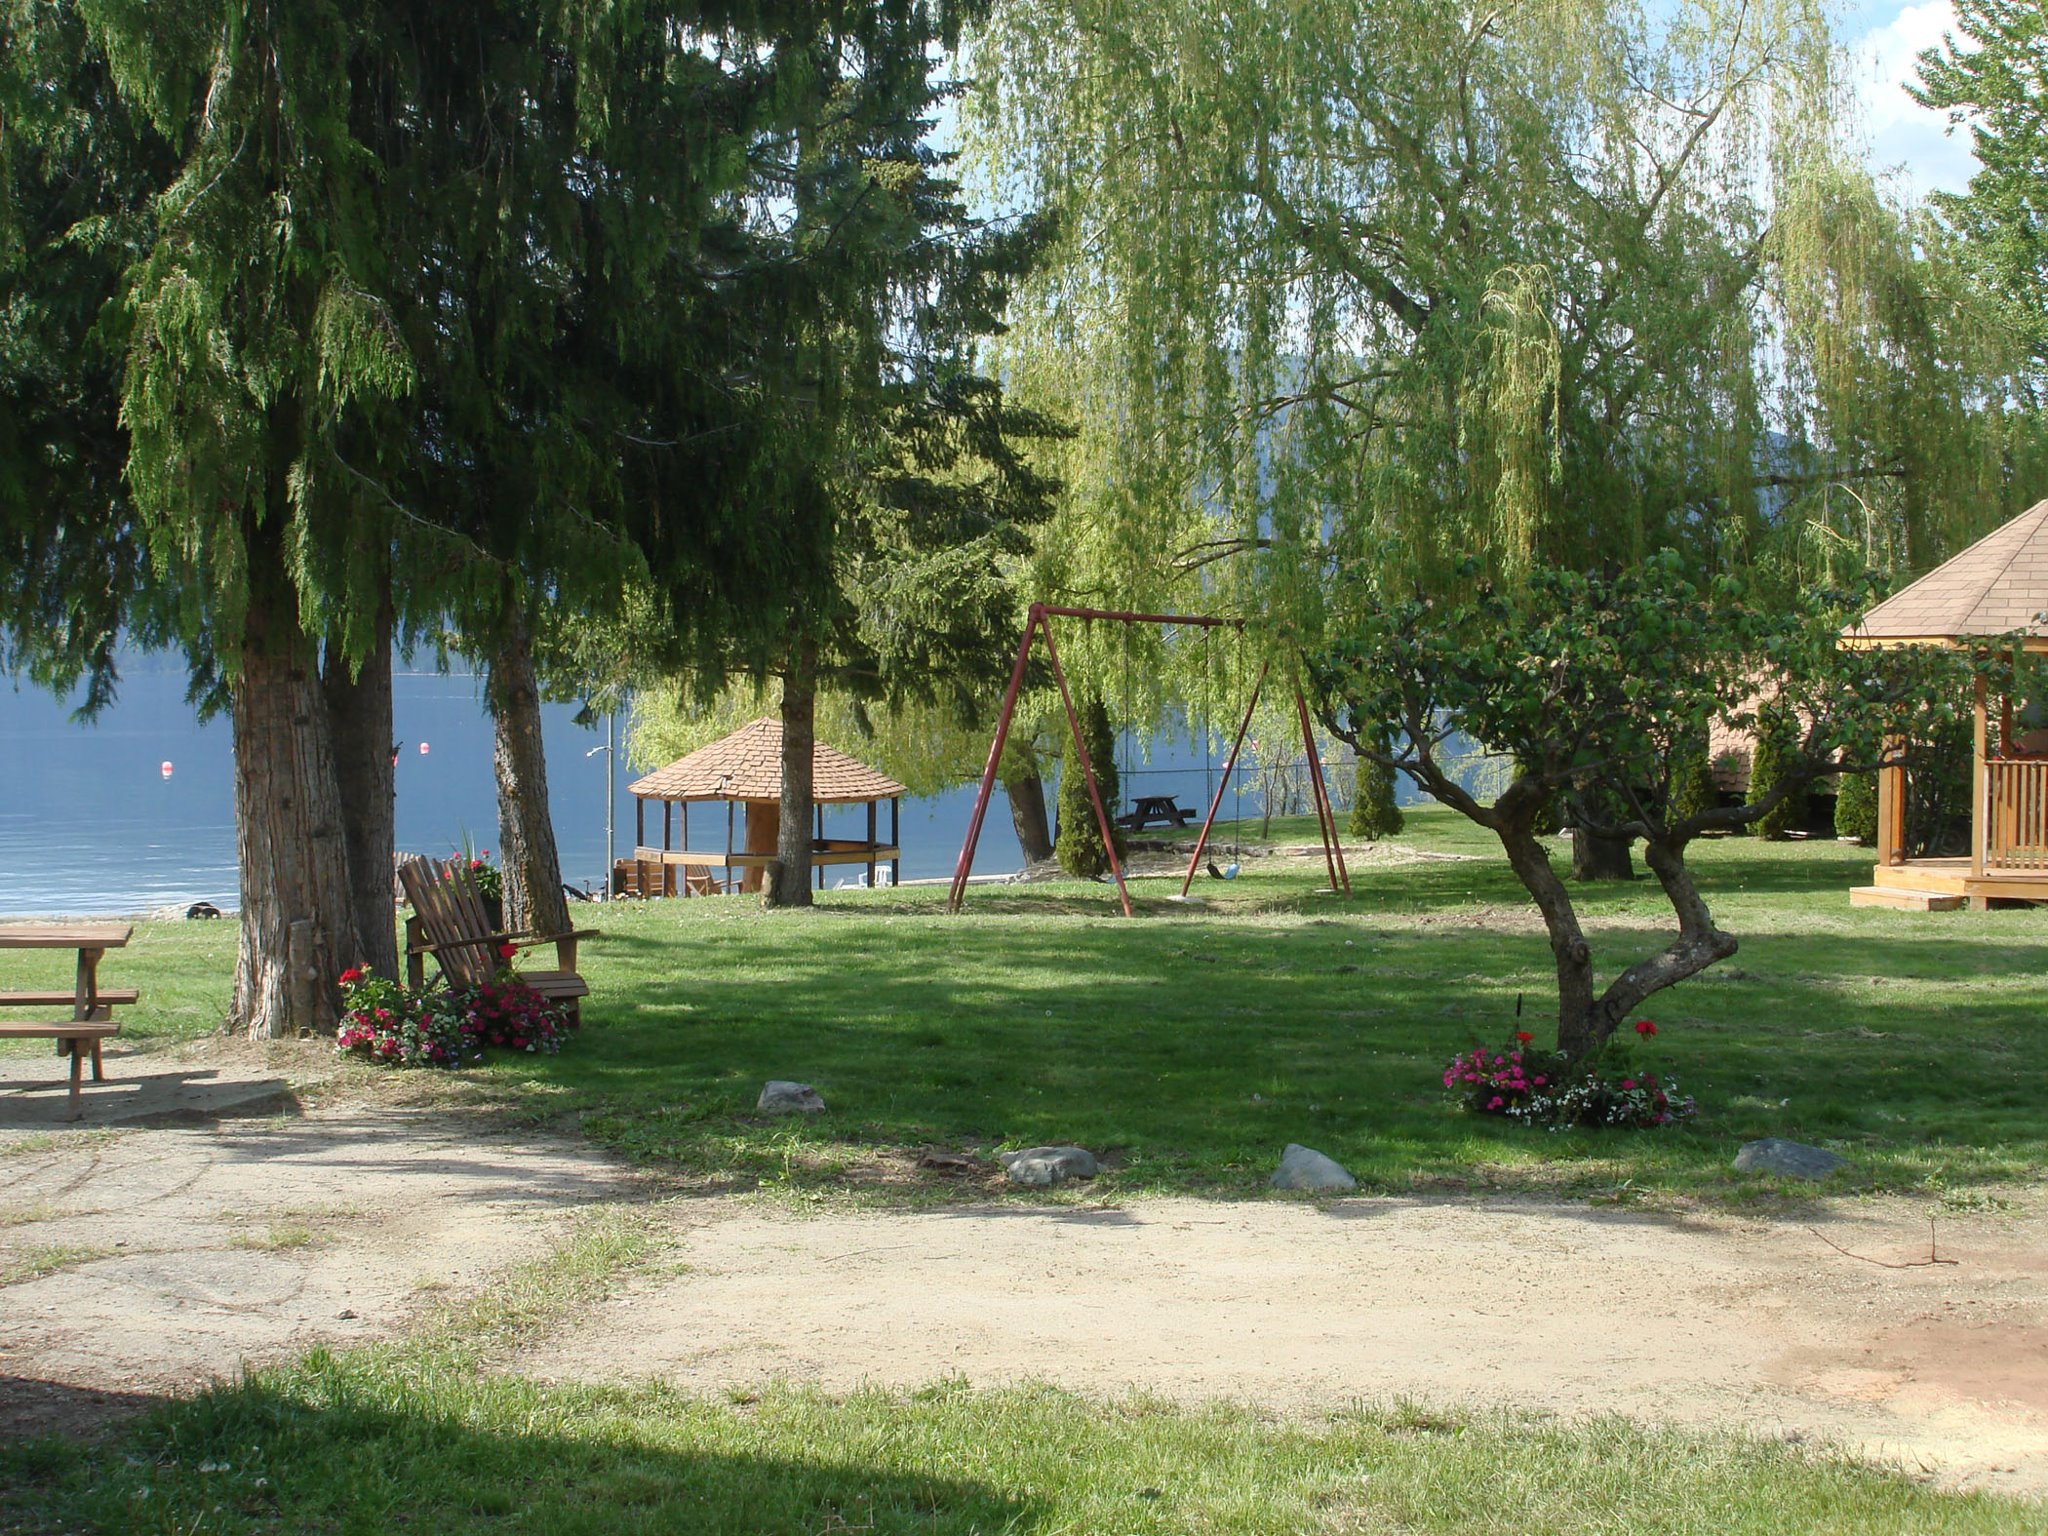 Jewel Bay Resort: Jewel Bay Resort is a family resort consisting of 14 cabins and 12 RV campsites located along the sandy shores of Shuswap Lake. Close to marinas and golf courses, Jewel […]